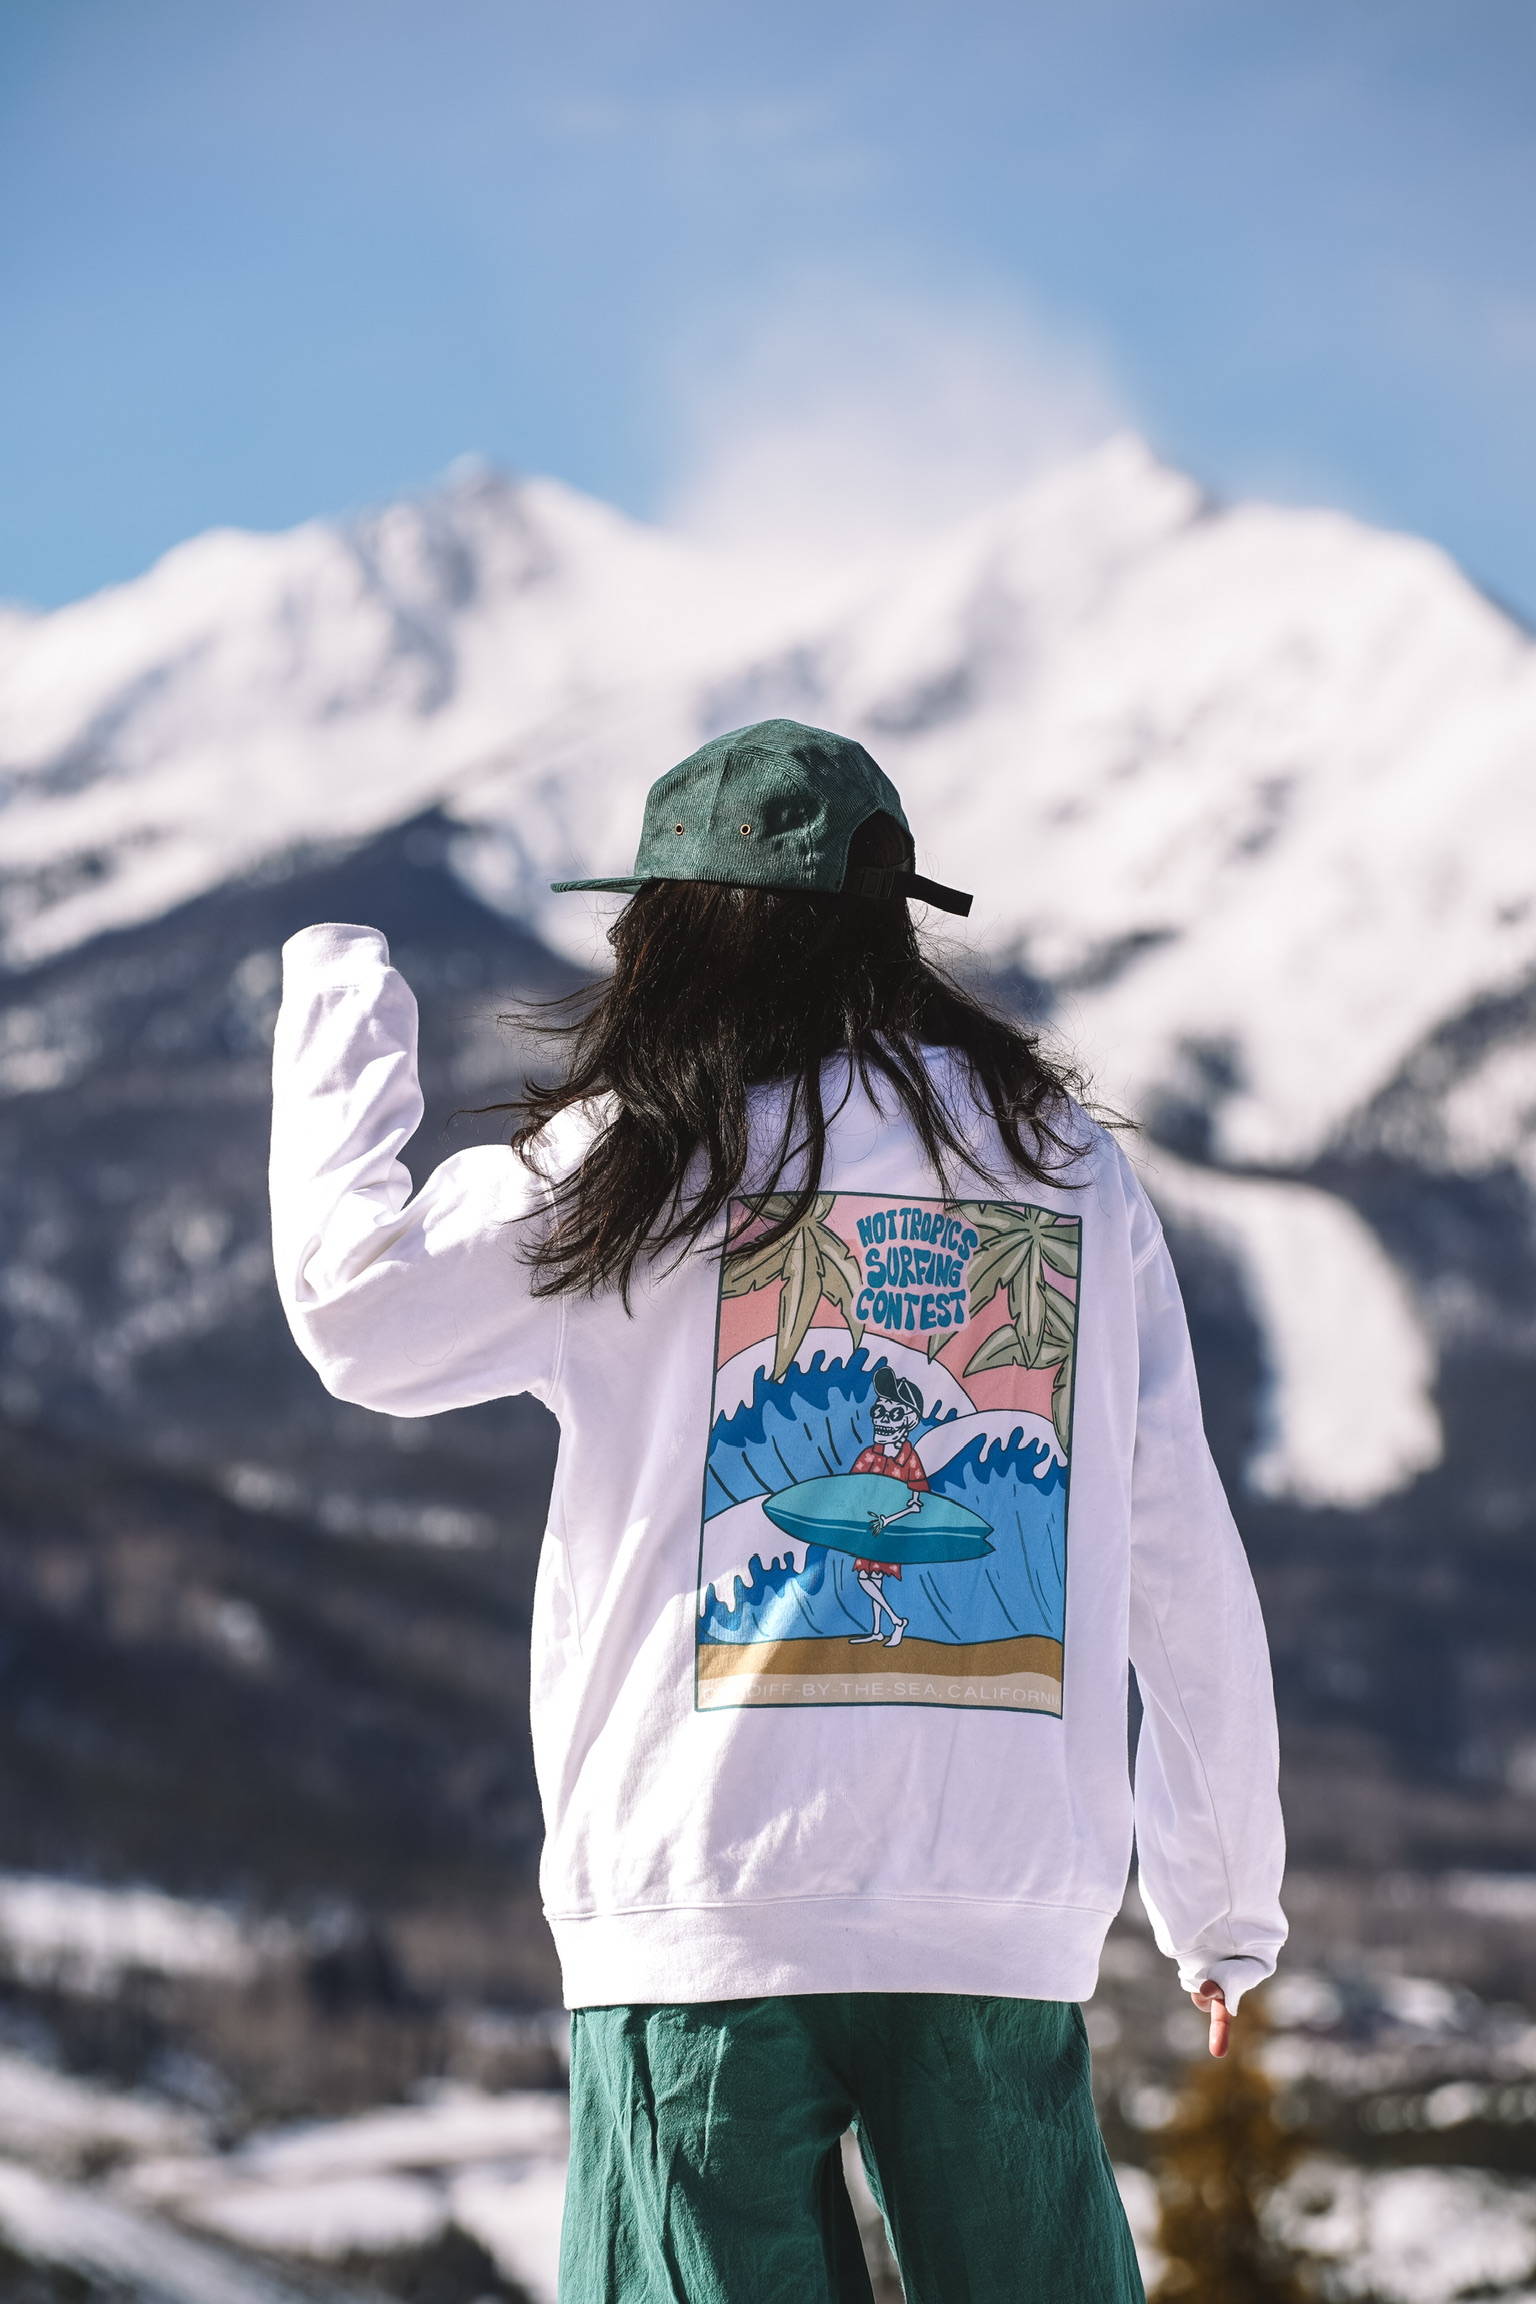 A woman standing in front of mountains wearing a white crewneck and green cap